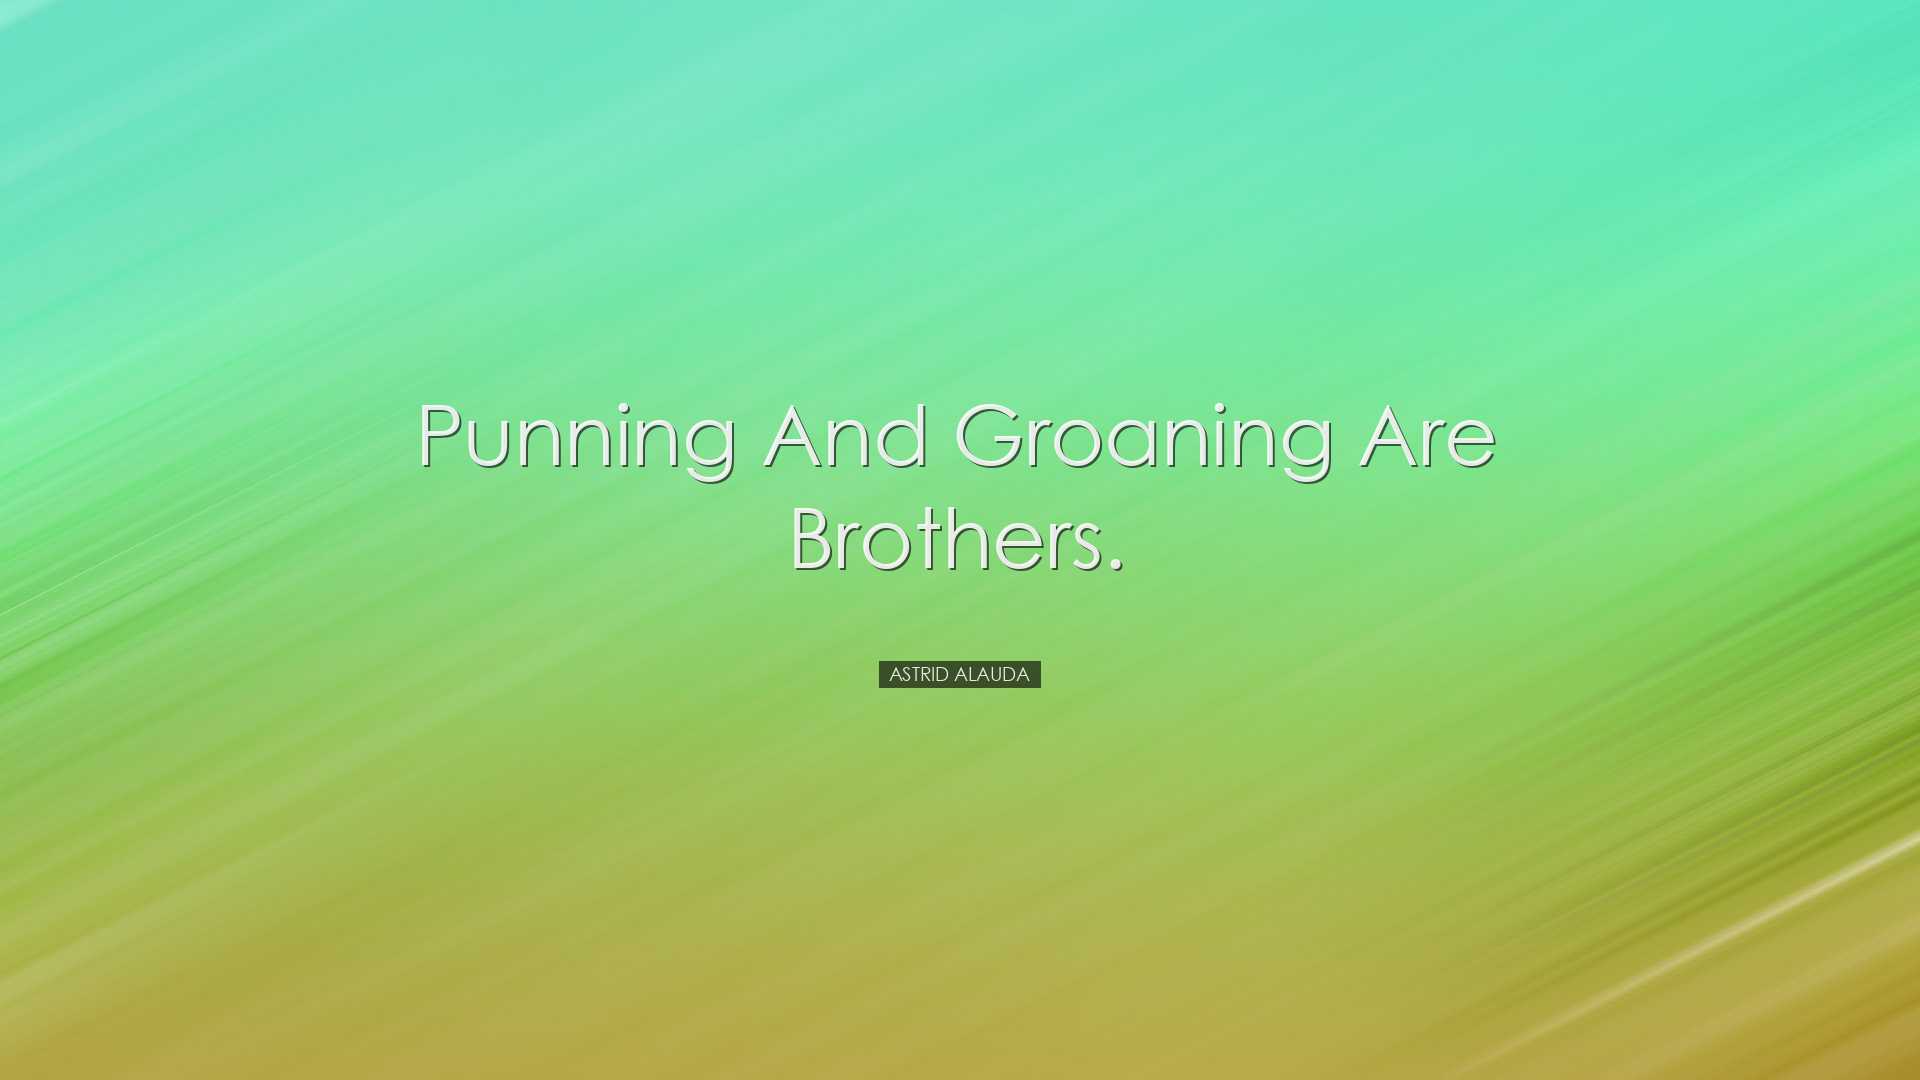 Punning and groaning are brothers. - Astrid Alauda